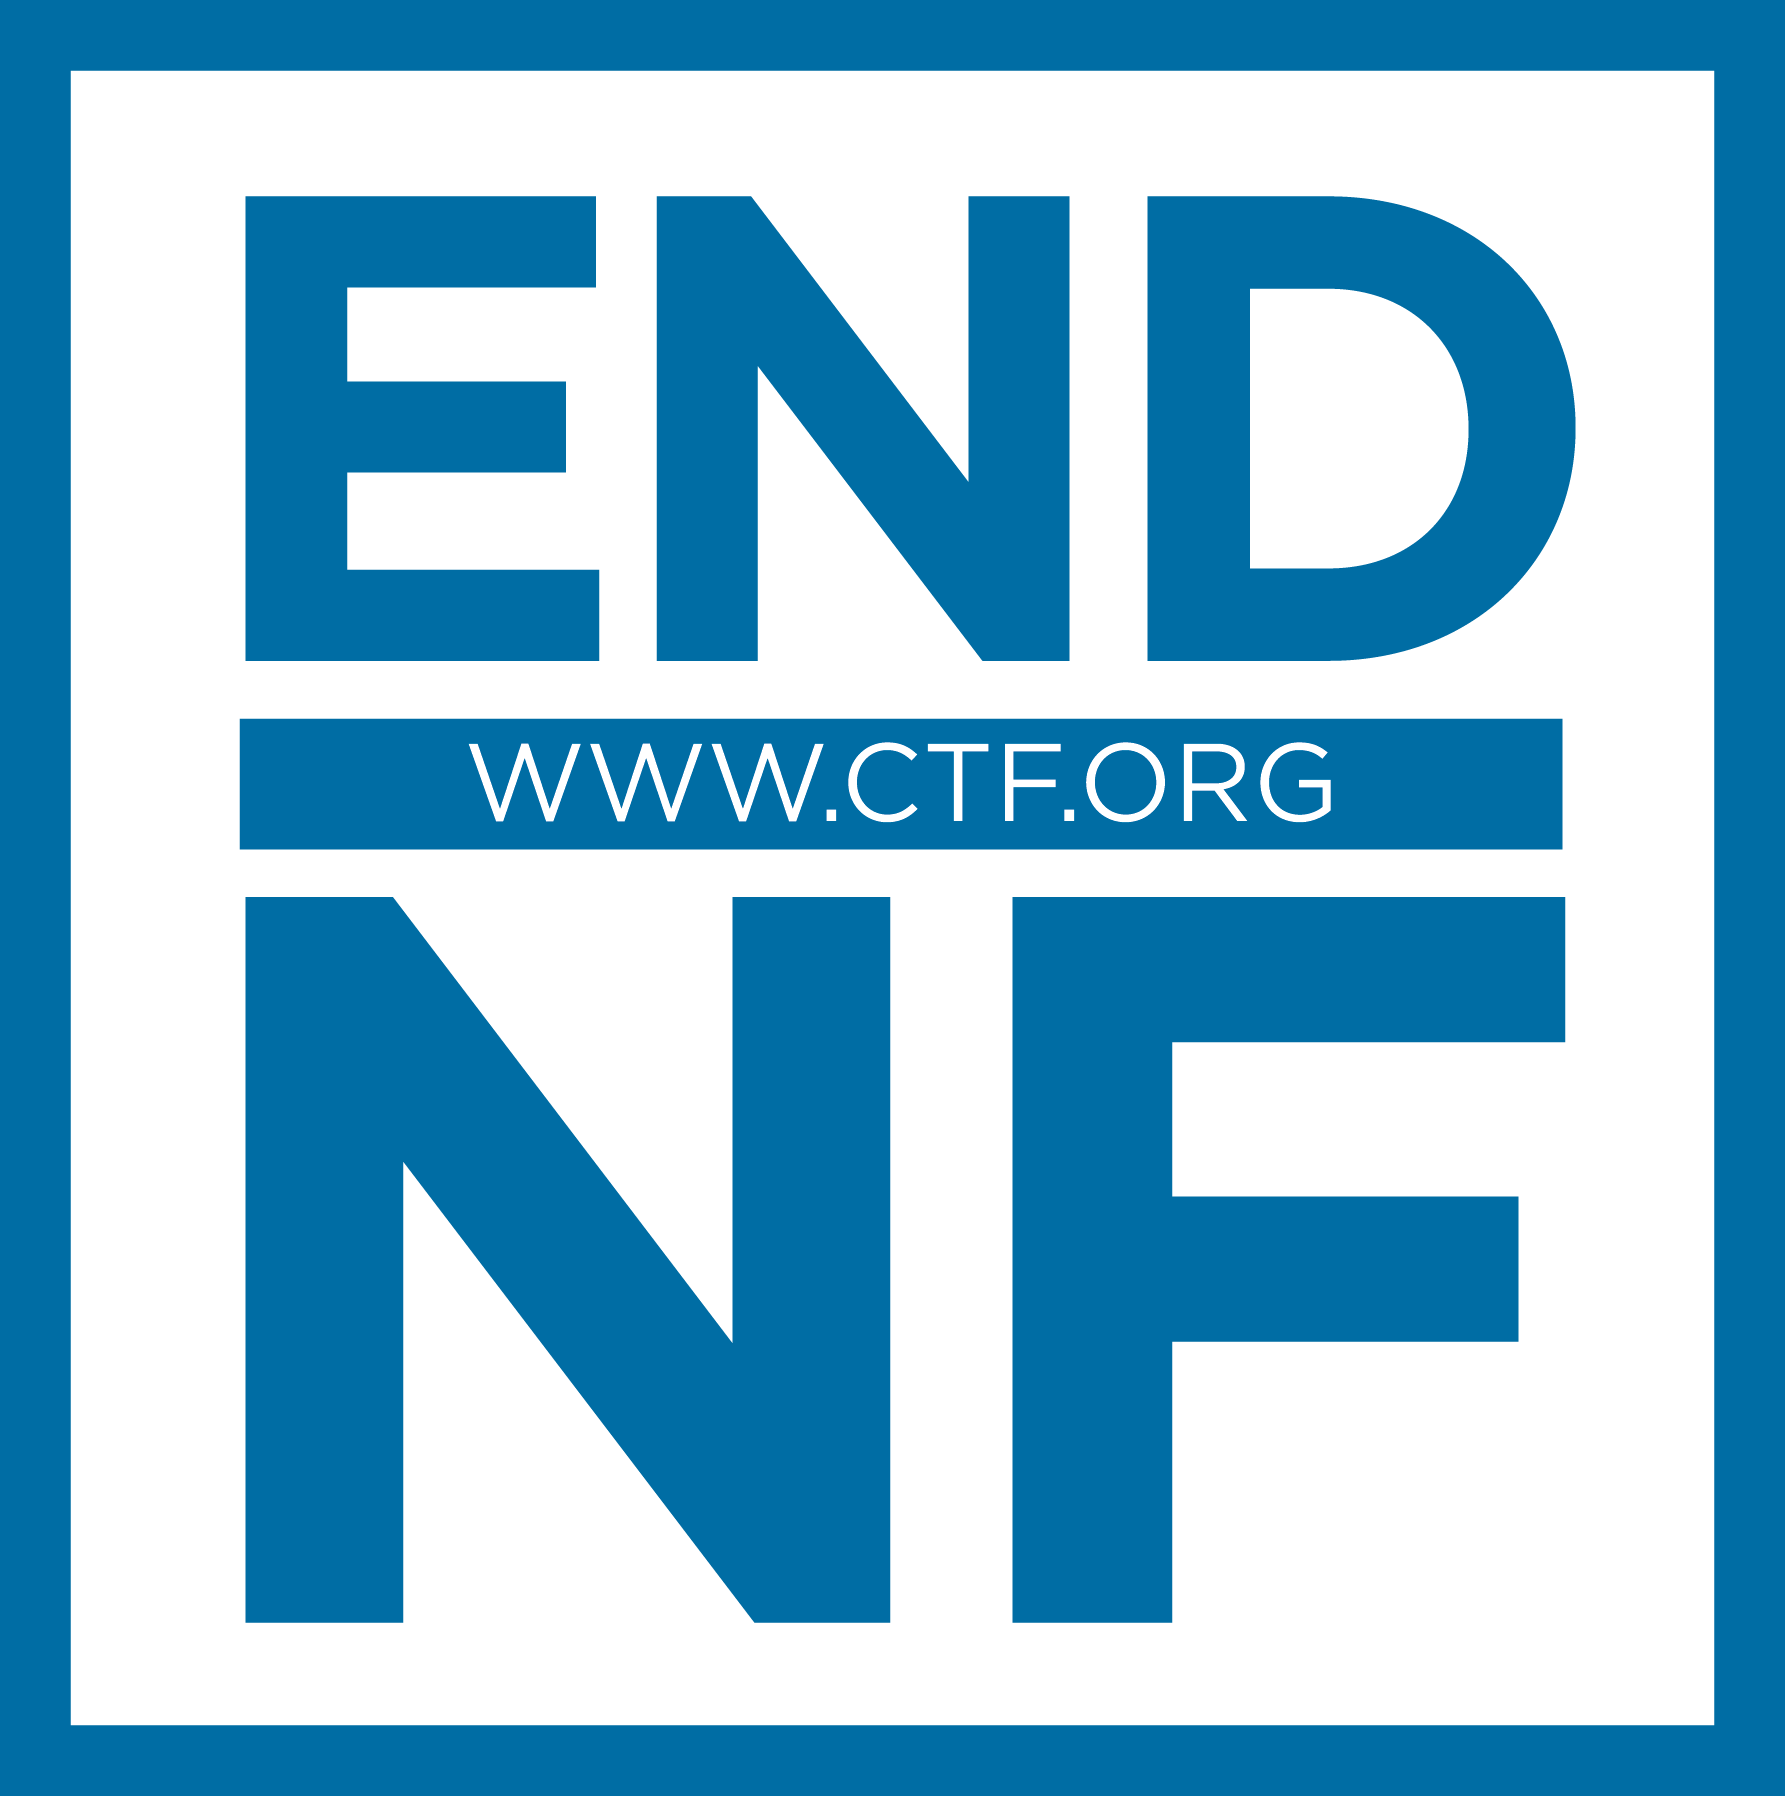 End NF - ctf.org in a rectangle - all blue